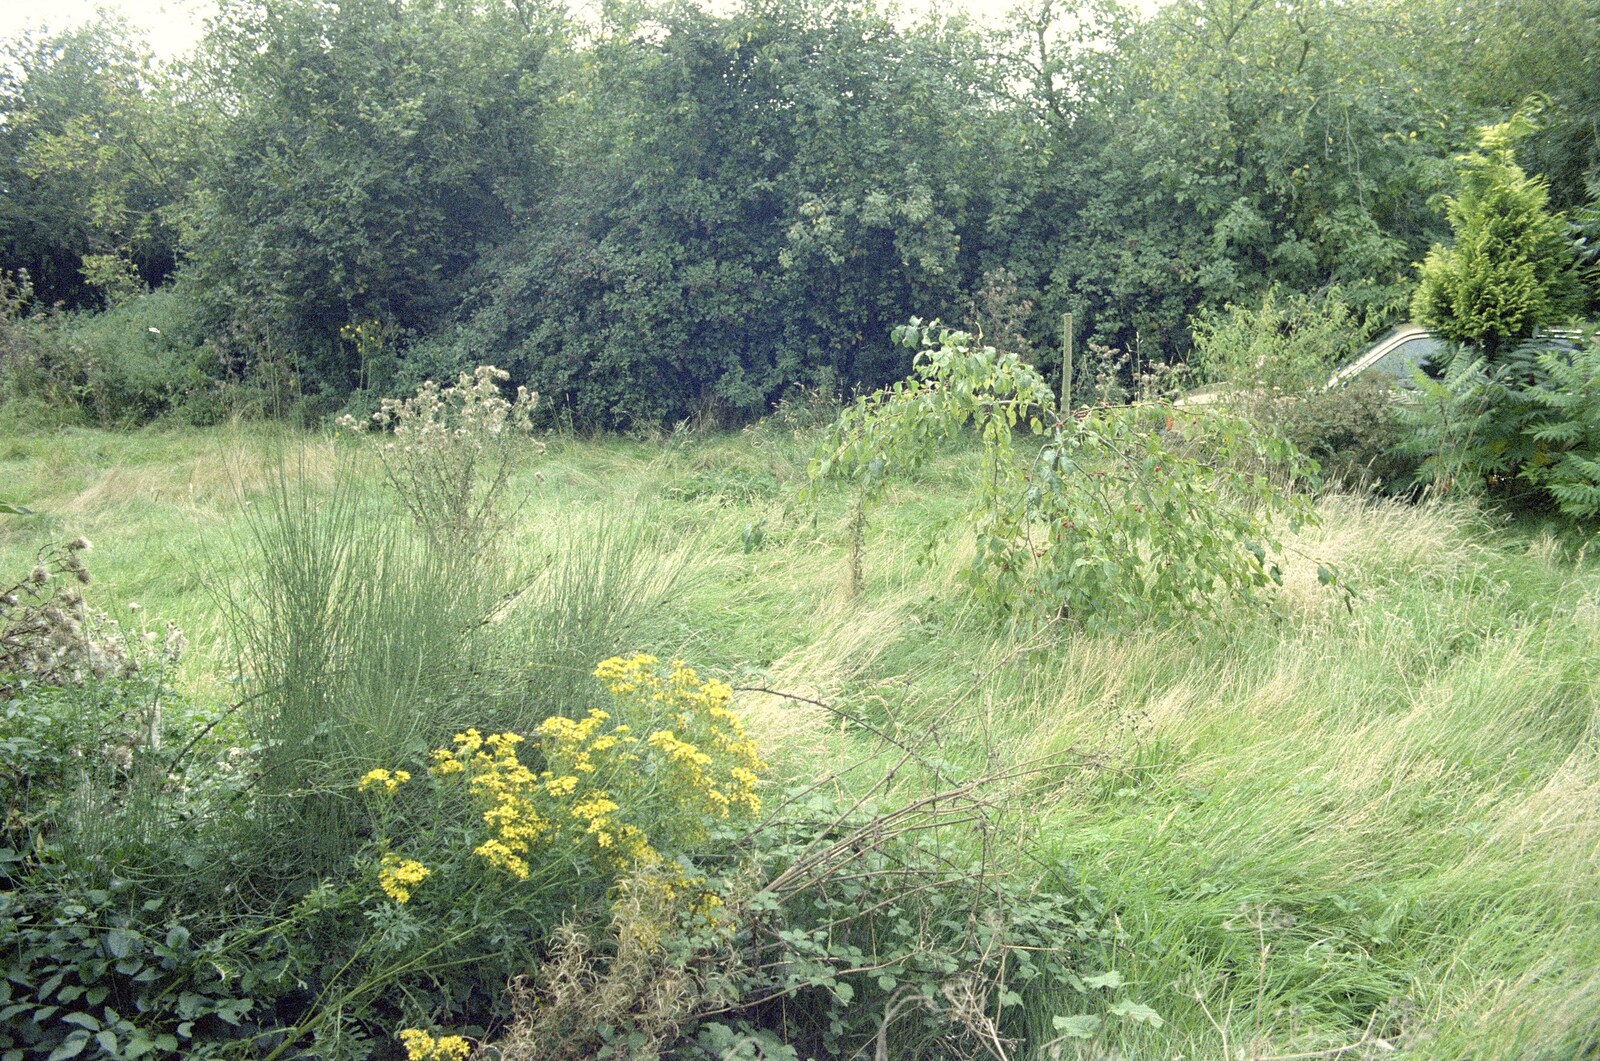 The wilderness that is the front garden from Moving In, Brome, Suffolk - 10th April 1994